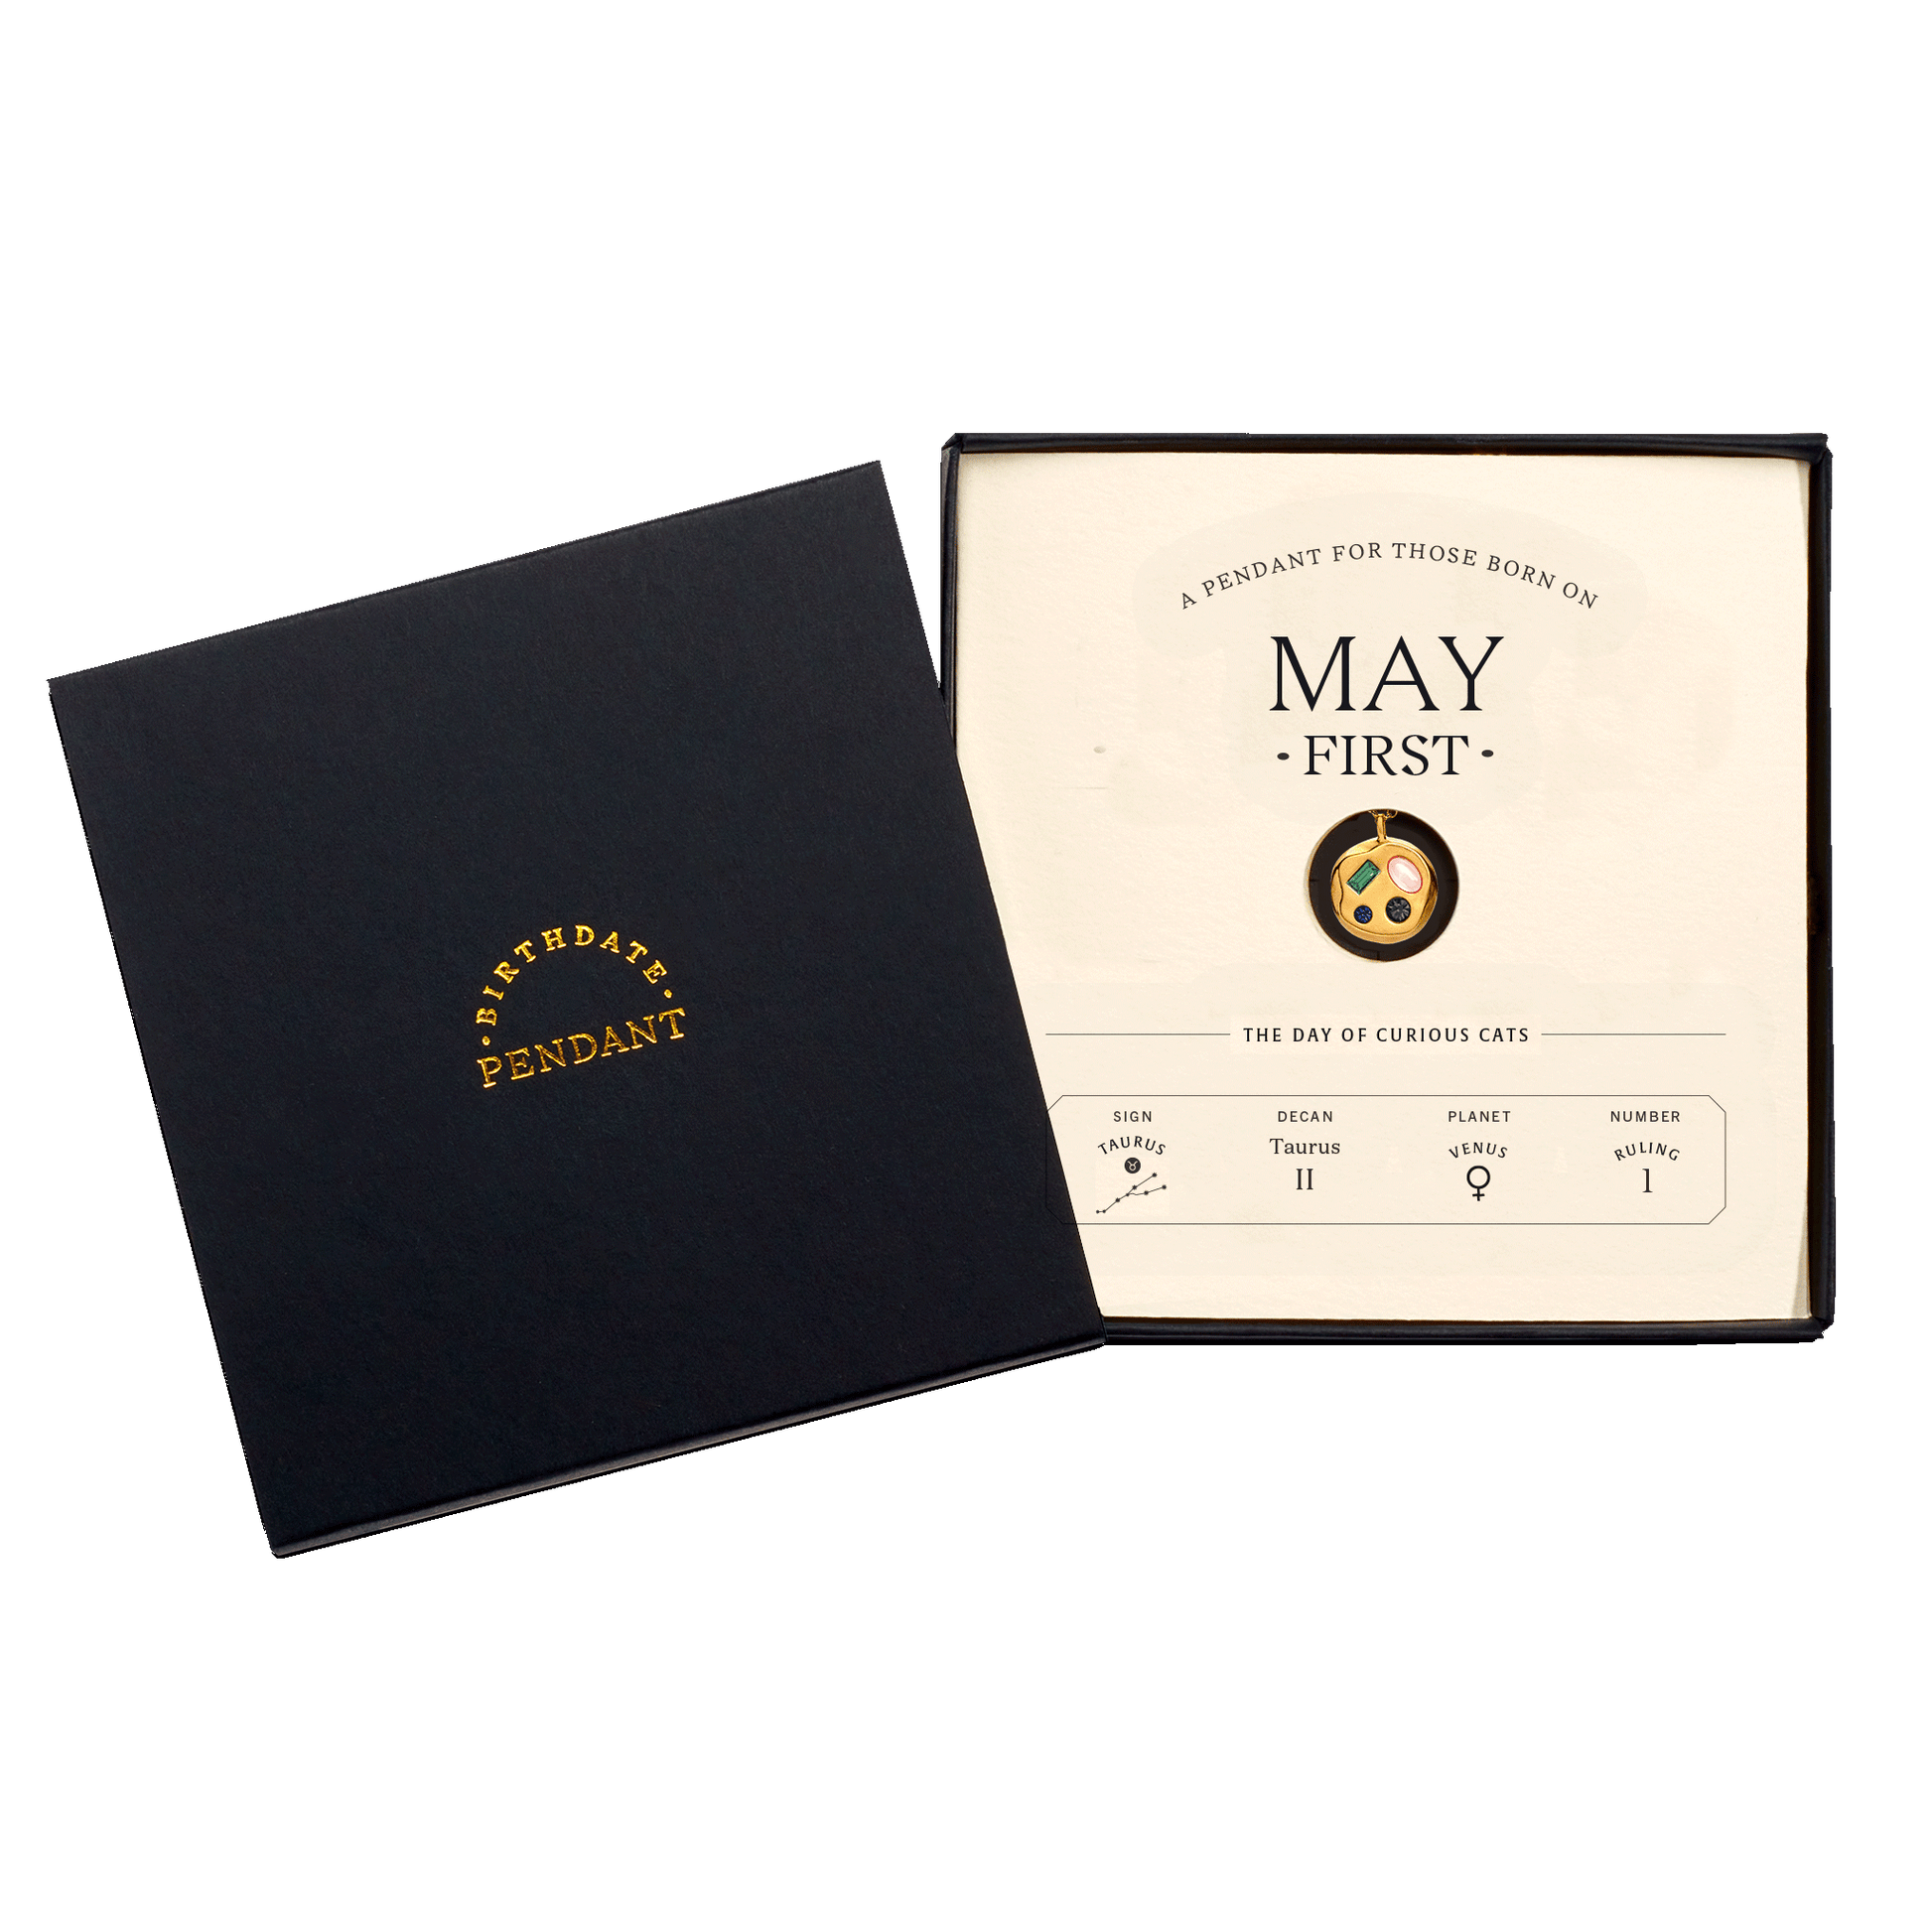 The May First Pendant inside its box